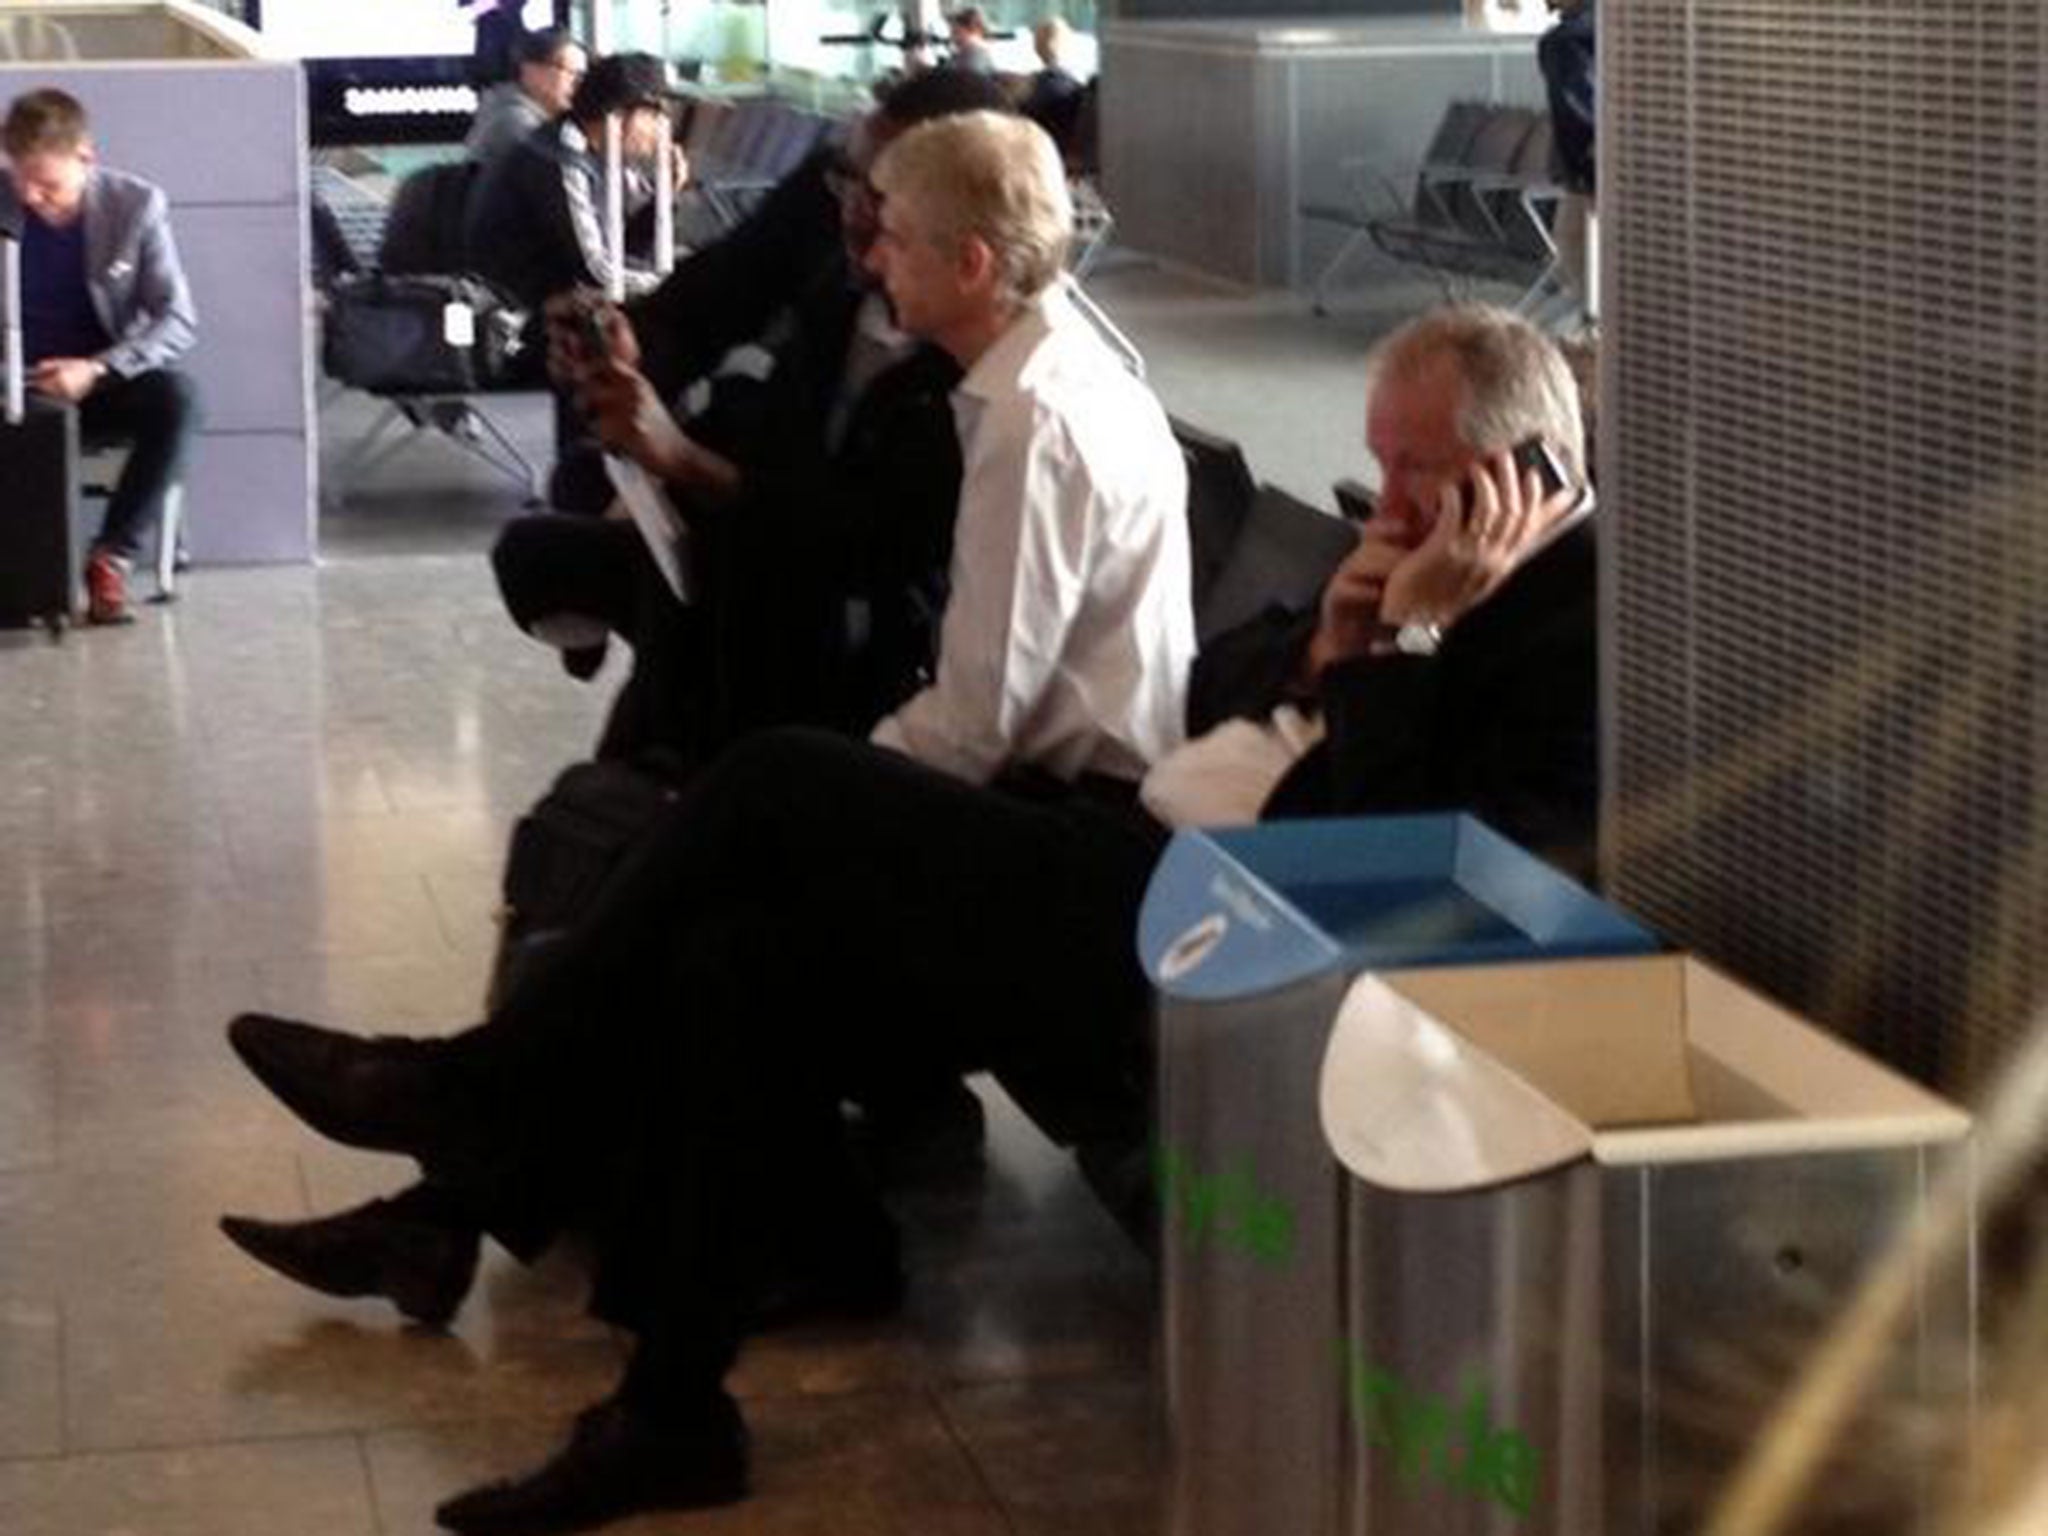 Arsene Wenger was reported to have been spotted at Heathrow Airport